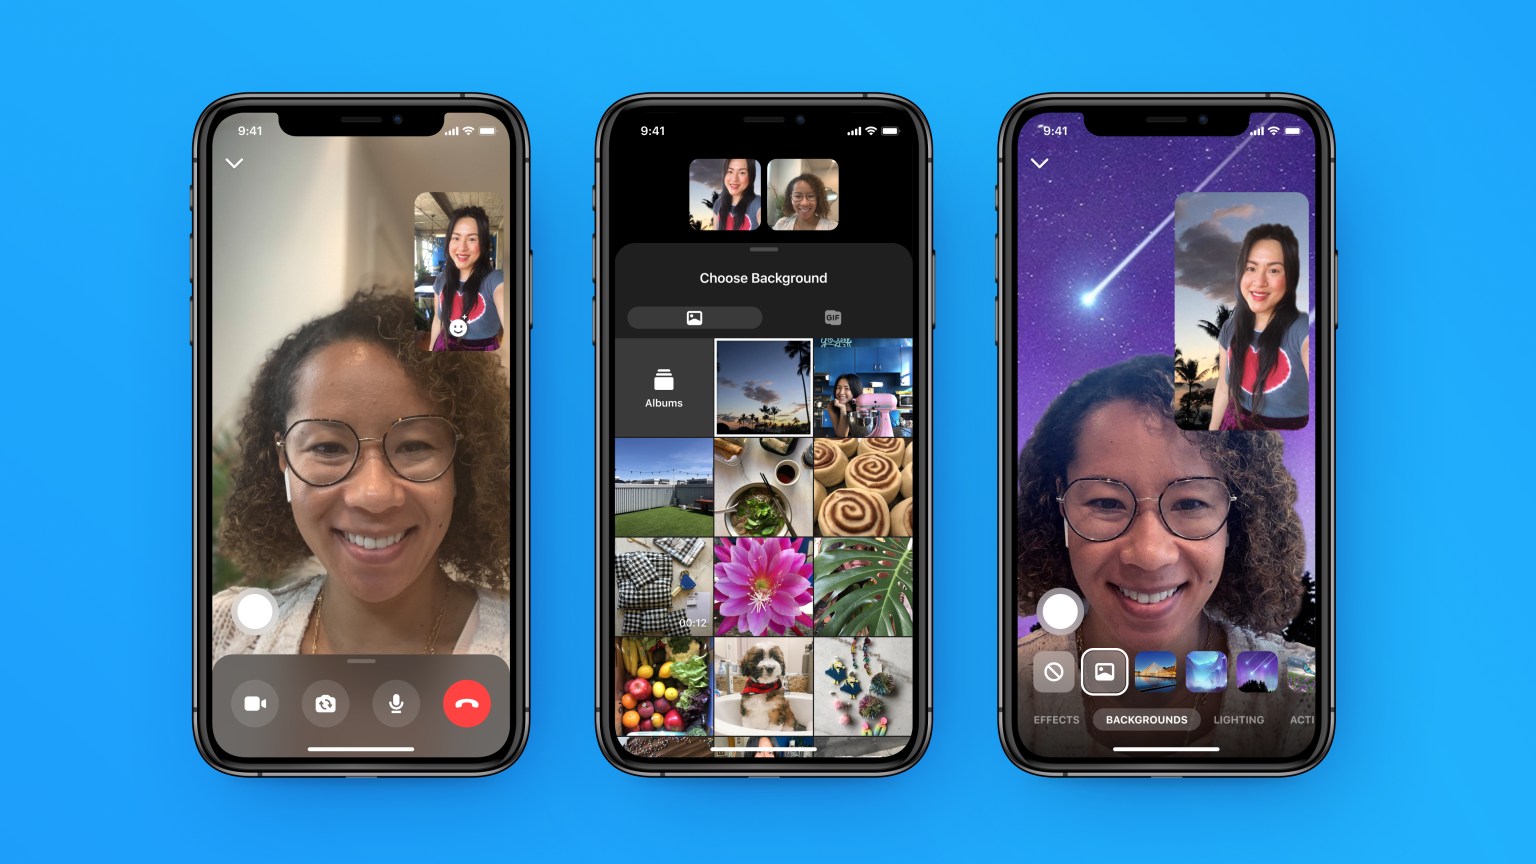 Facebook Added AR Effects and 360-degree Background to Messenger Rooms